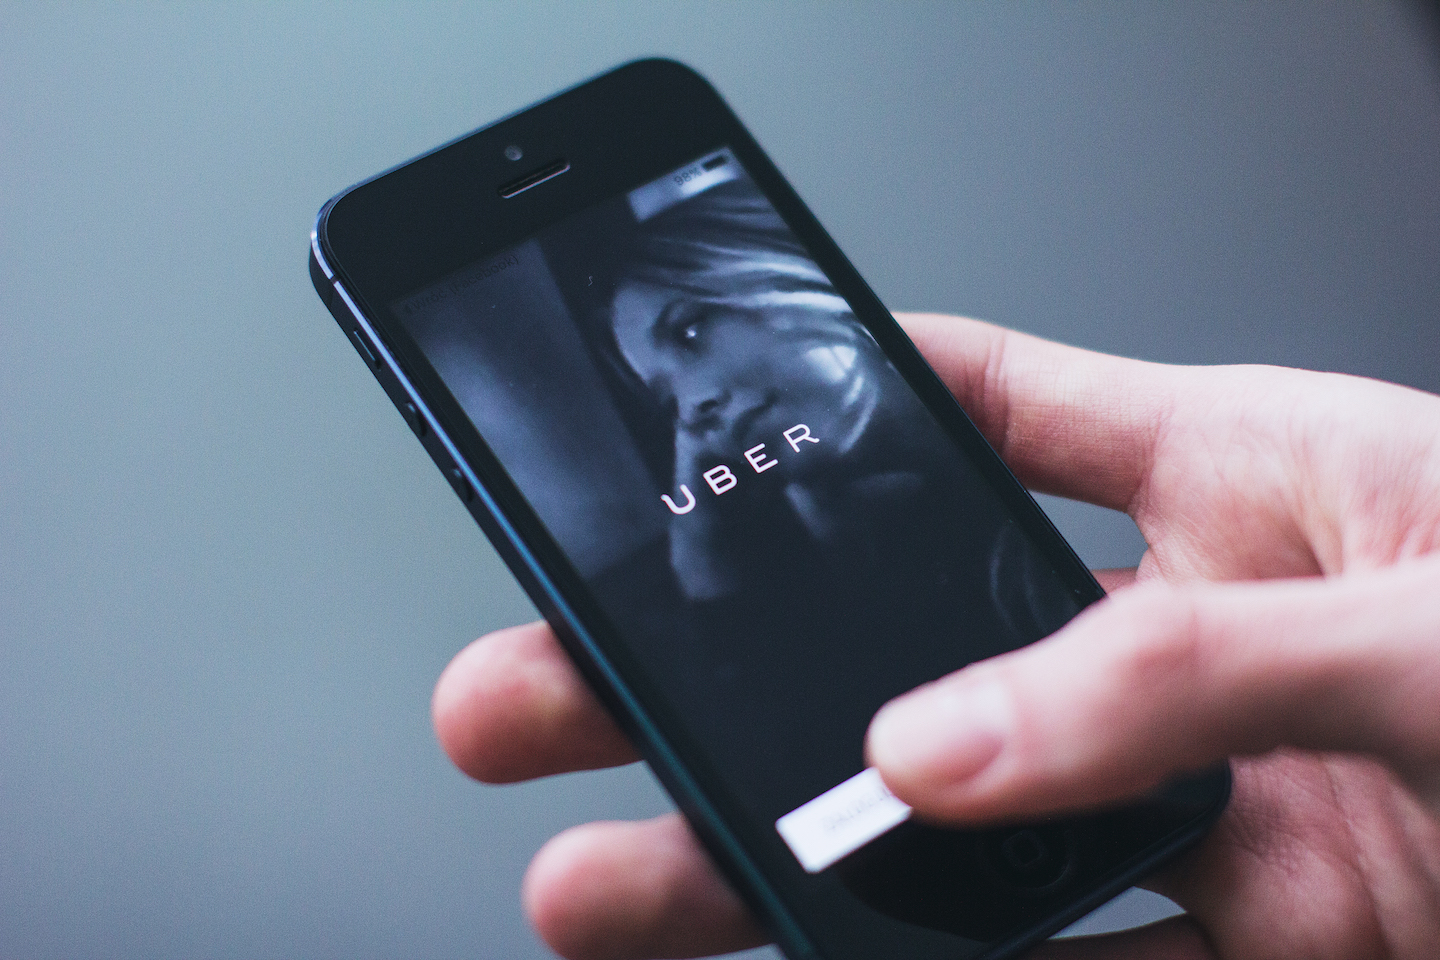 Image: “Unicorn” tech company UBER fires 3,500 people on 3-minute phone call, horrifying millennials